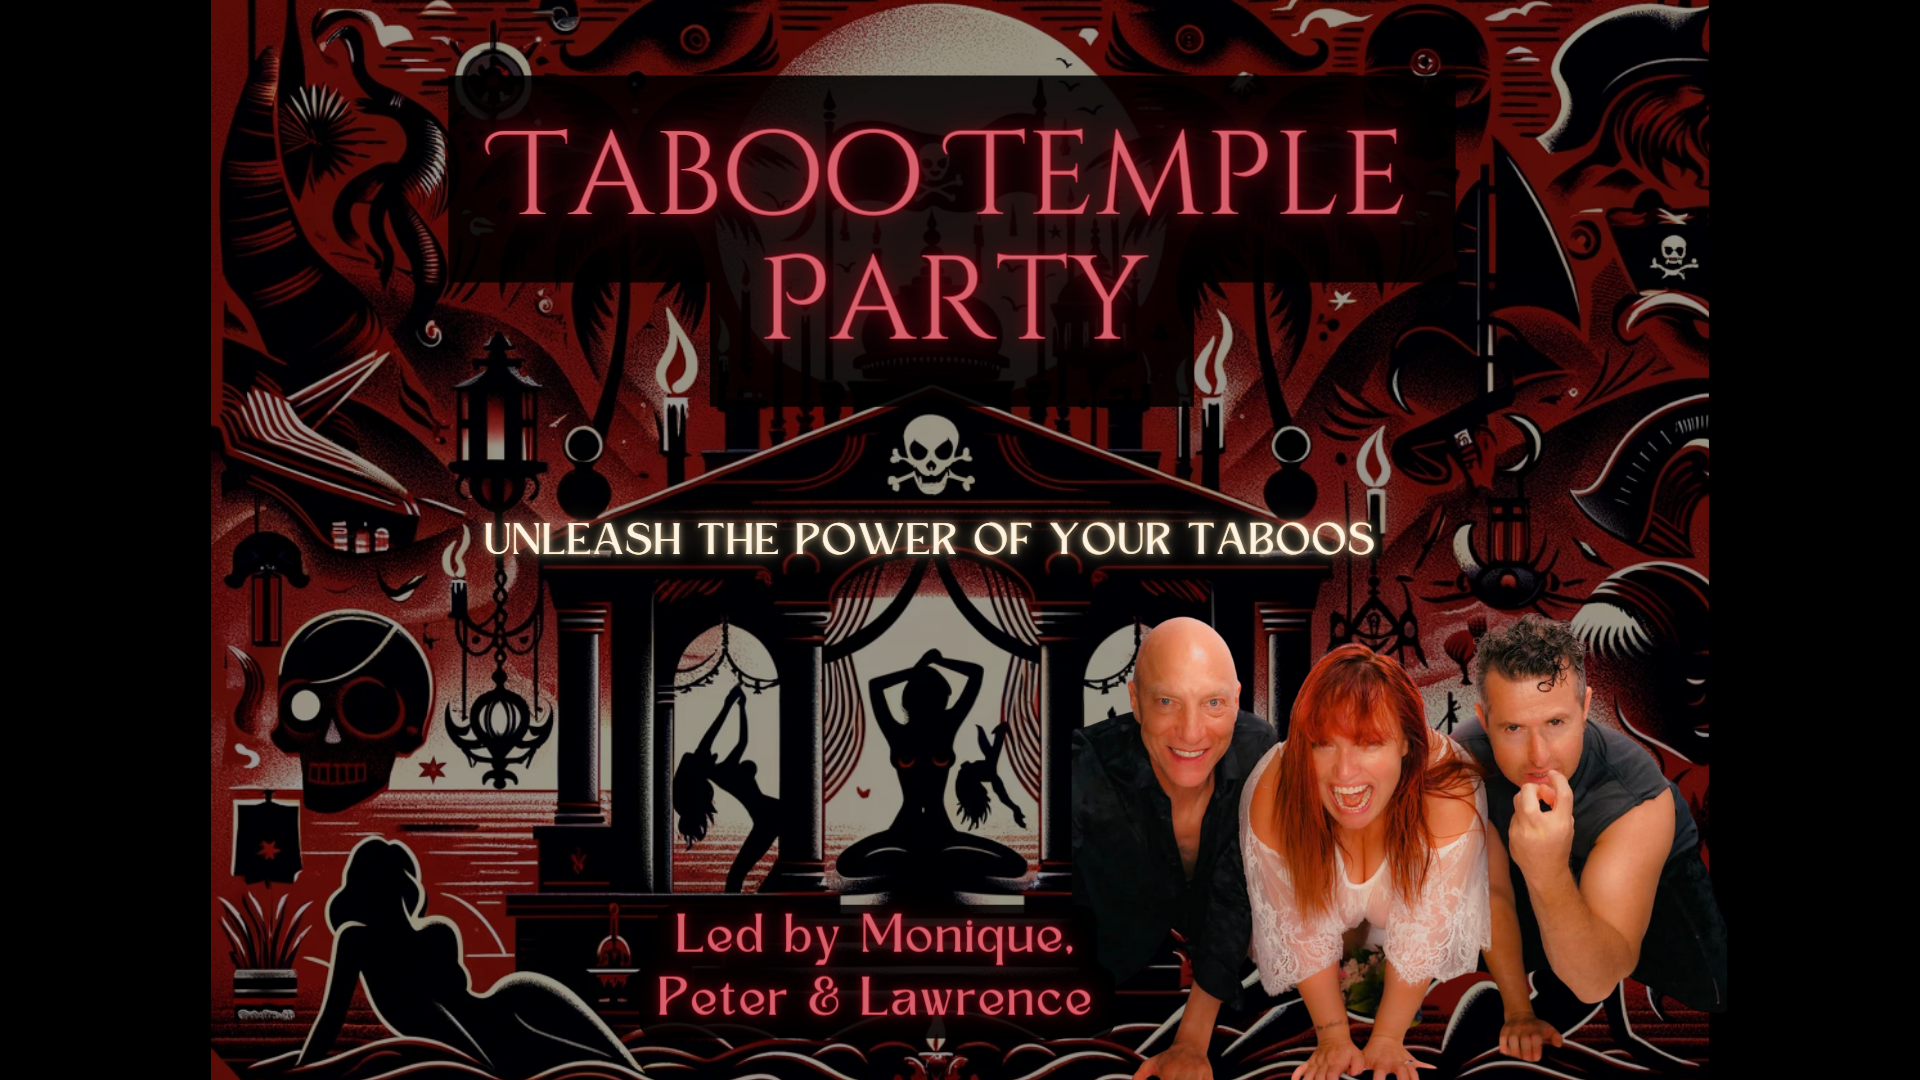 Unleash the Power of your Taboos Temple Party w/ Lawrence, Monique & Peter